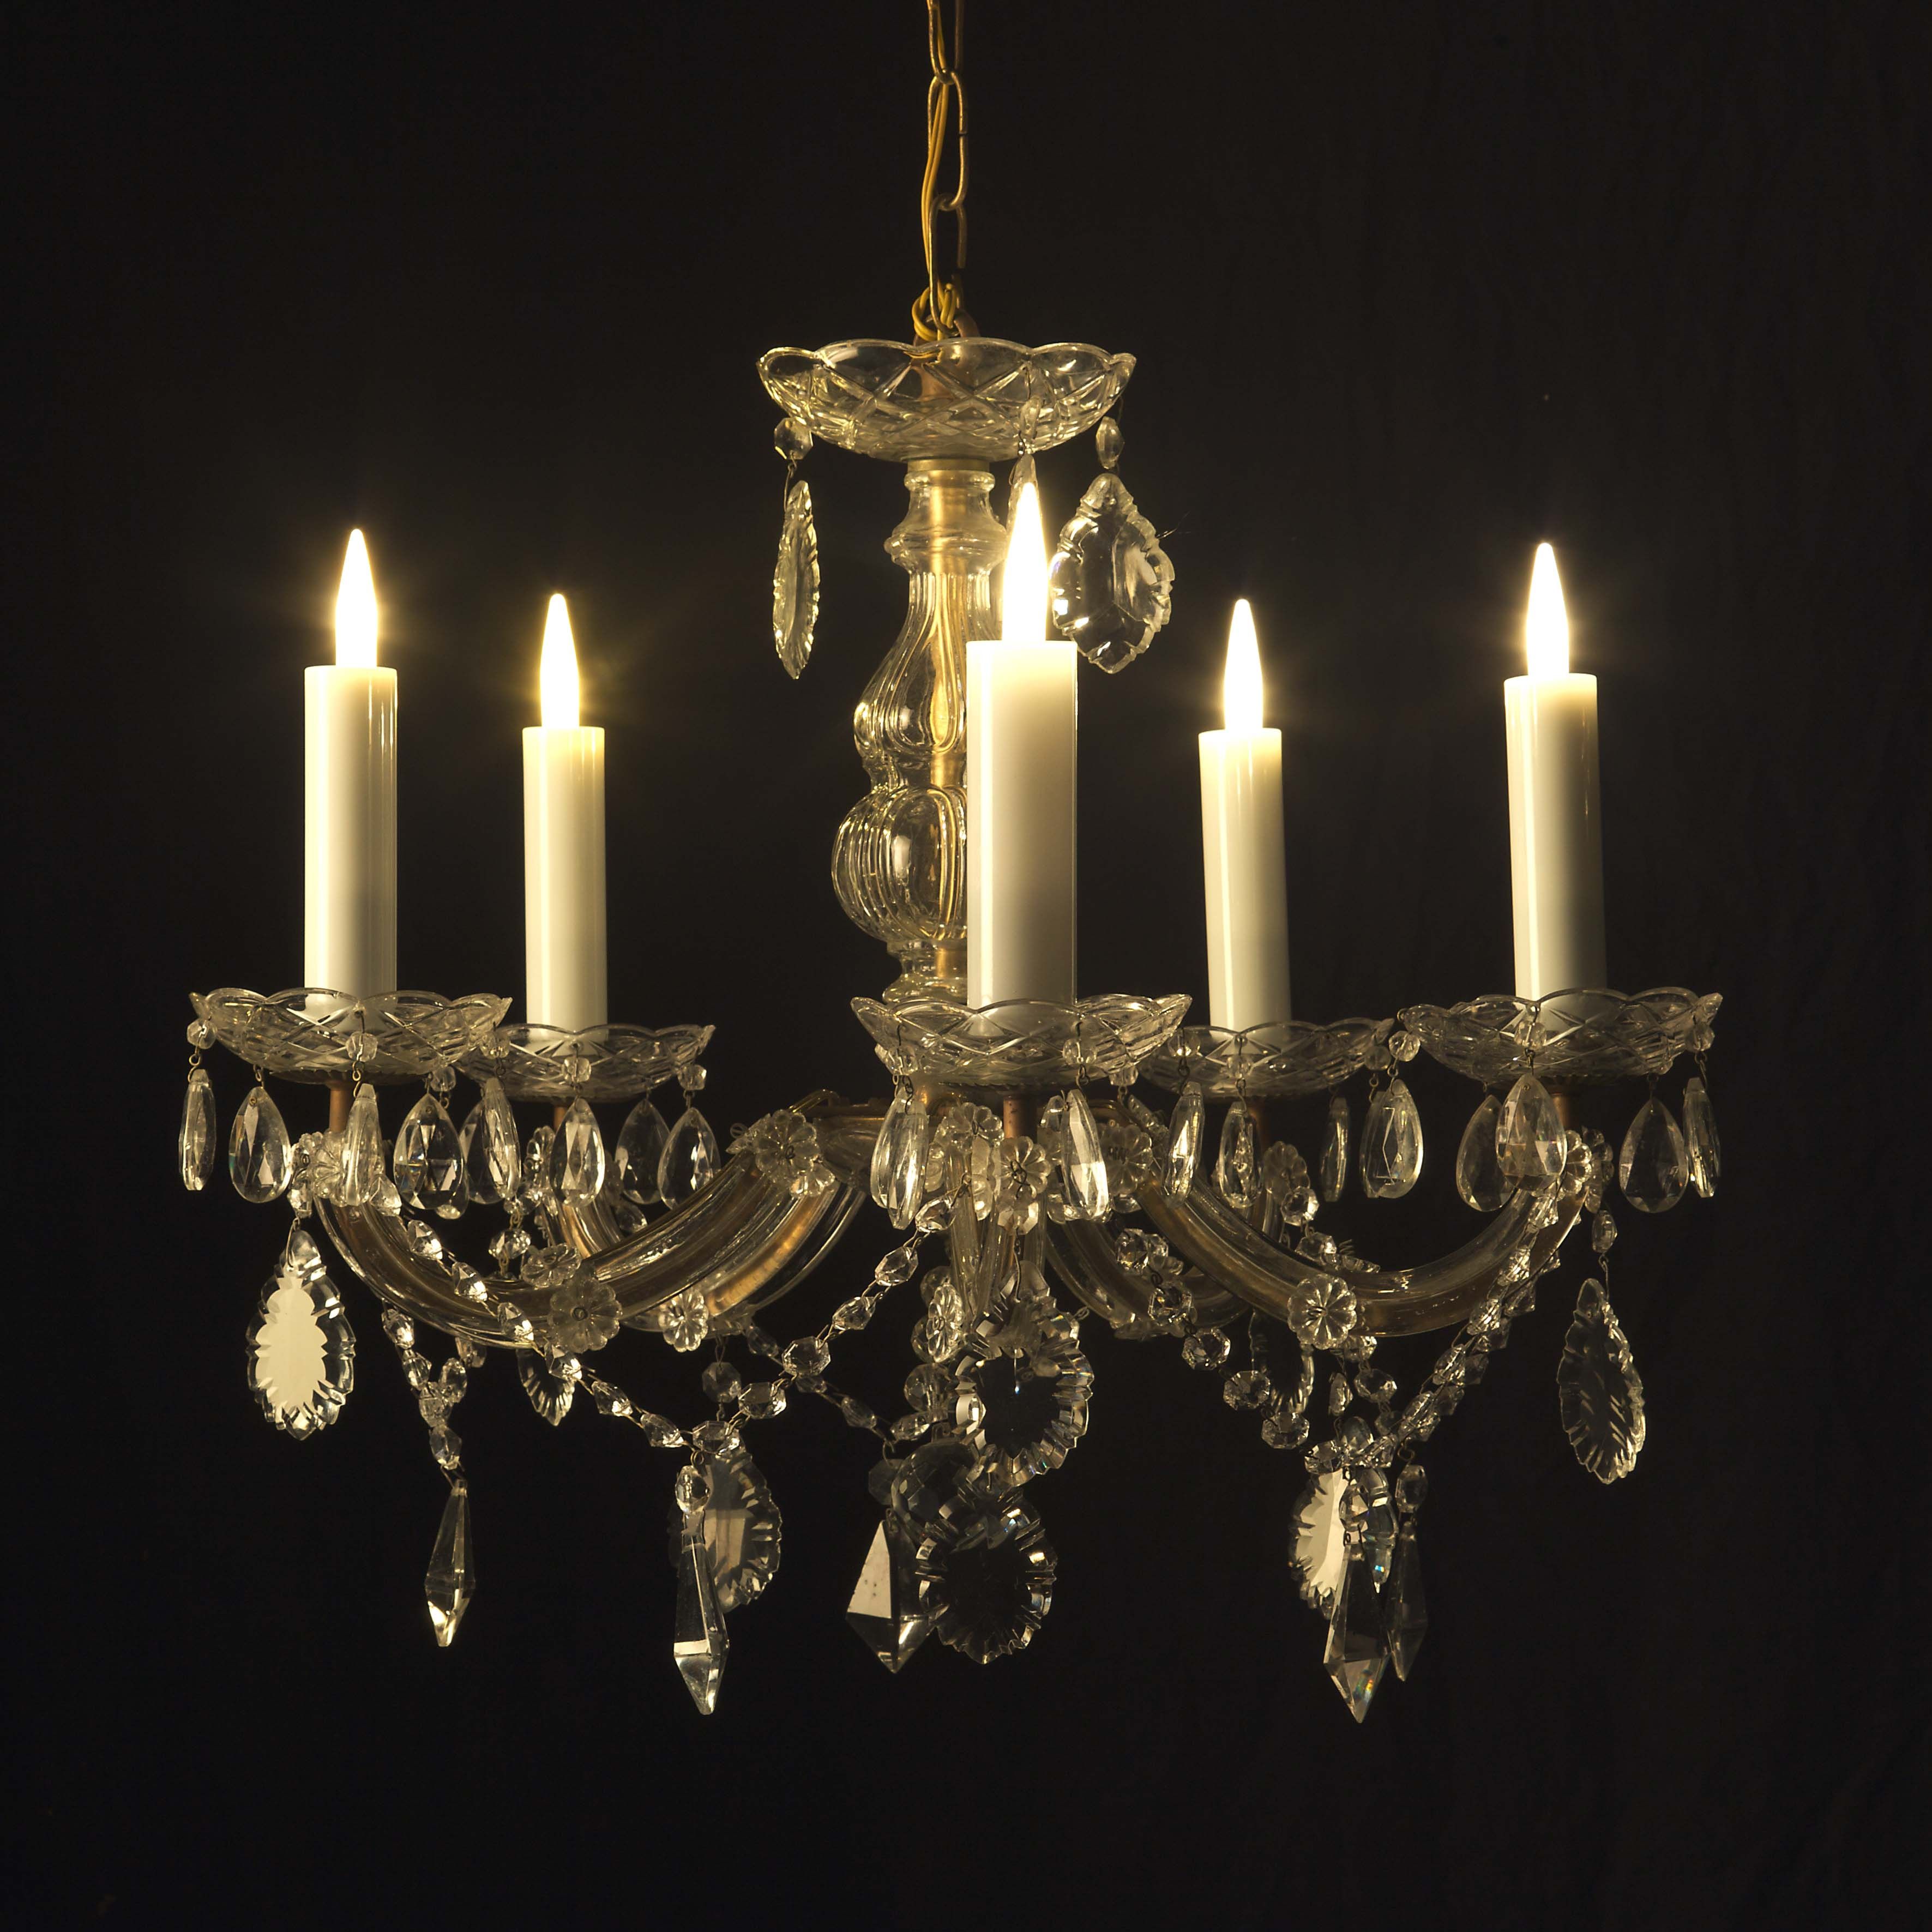 E Candle Easy Luxe Led Candle For Your Chandelier Inside Led Candle Chandeliers (View 1 of 25)